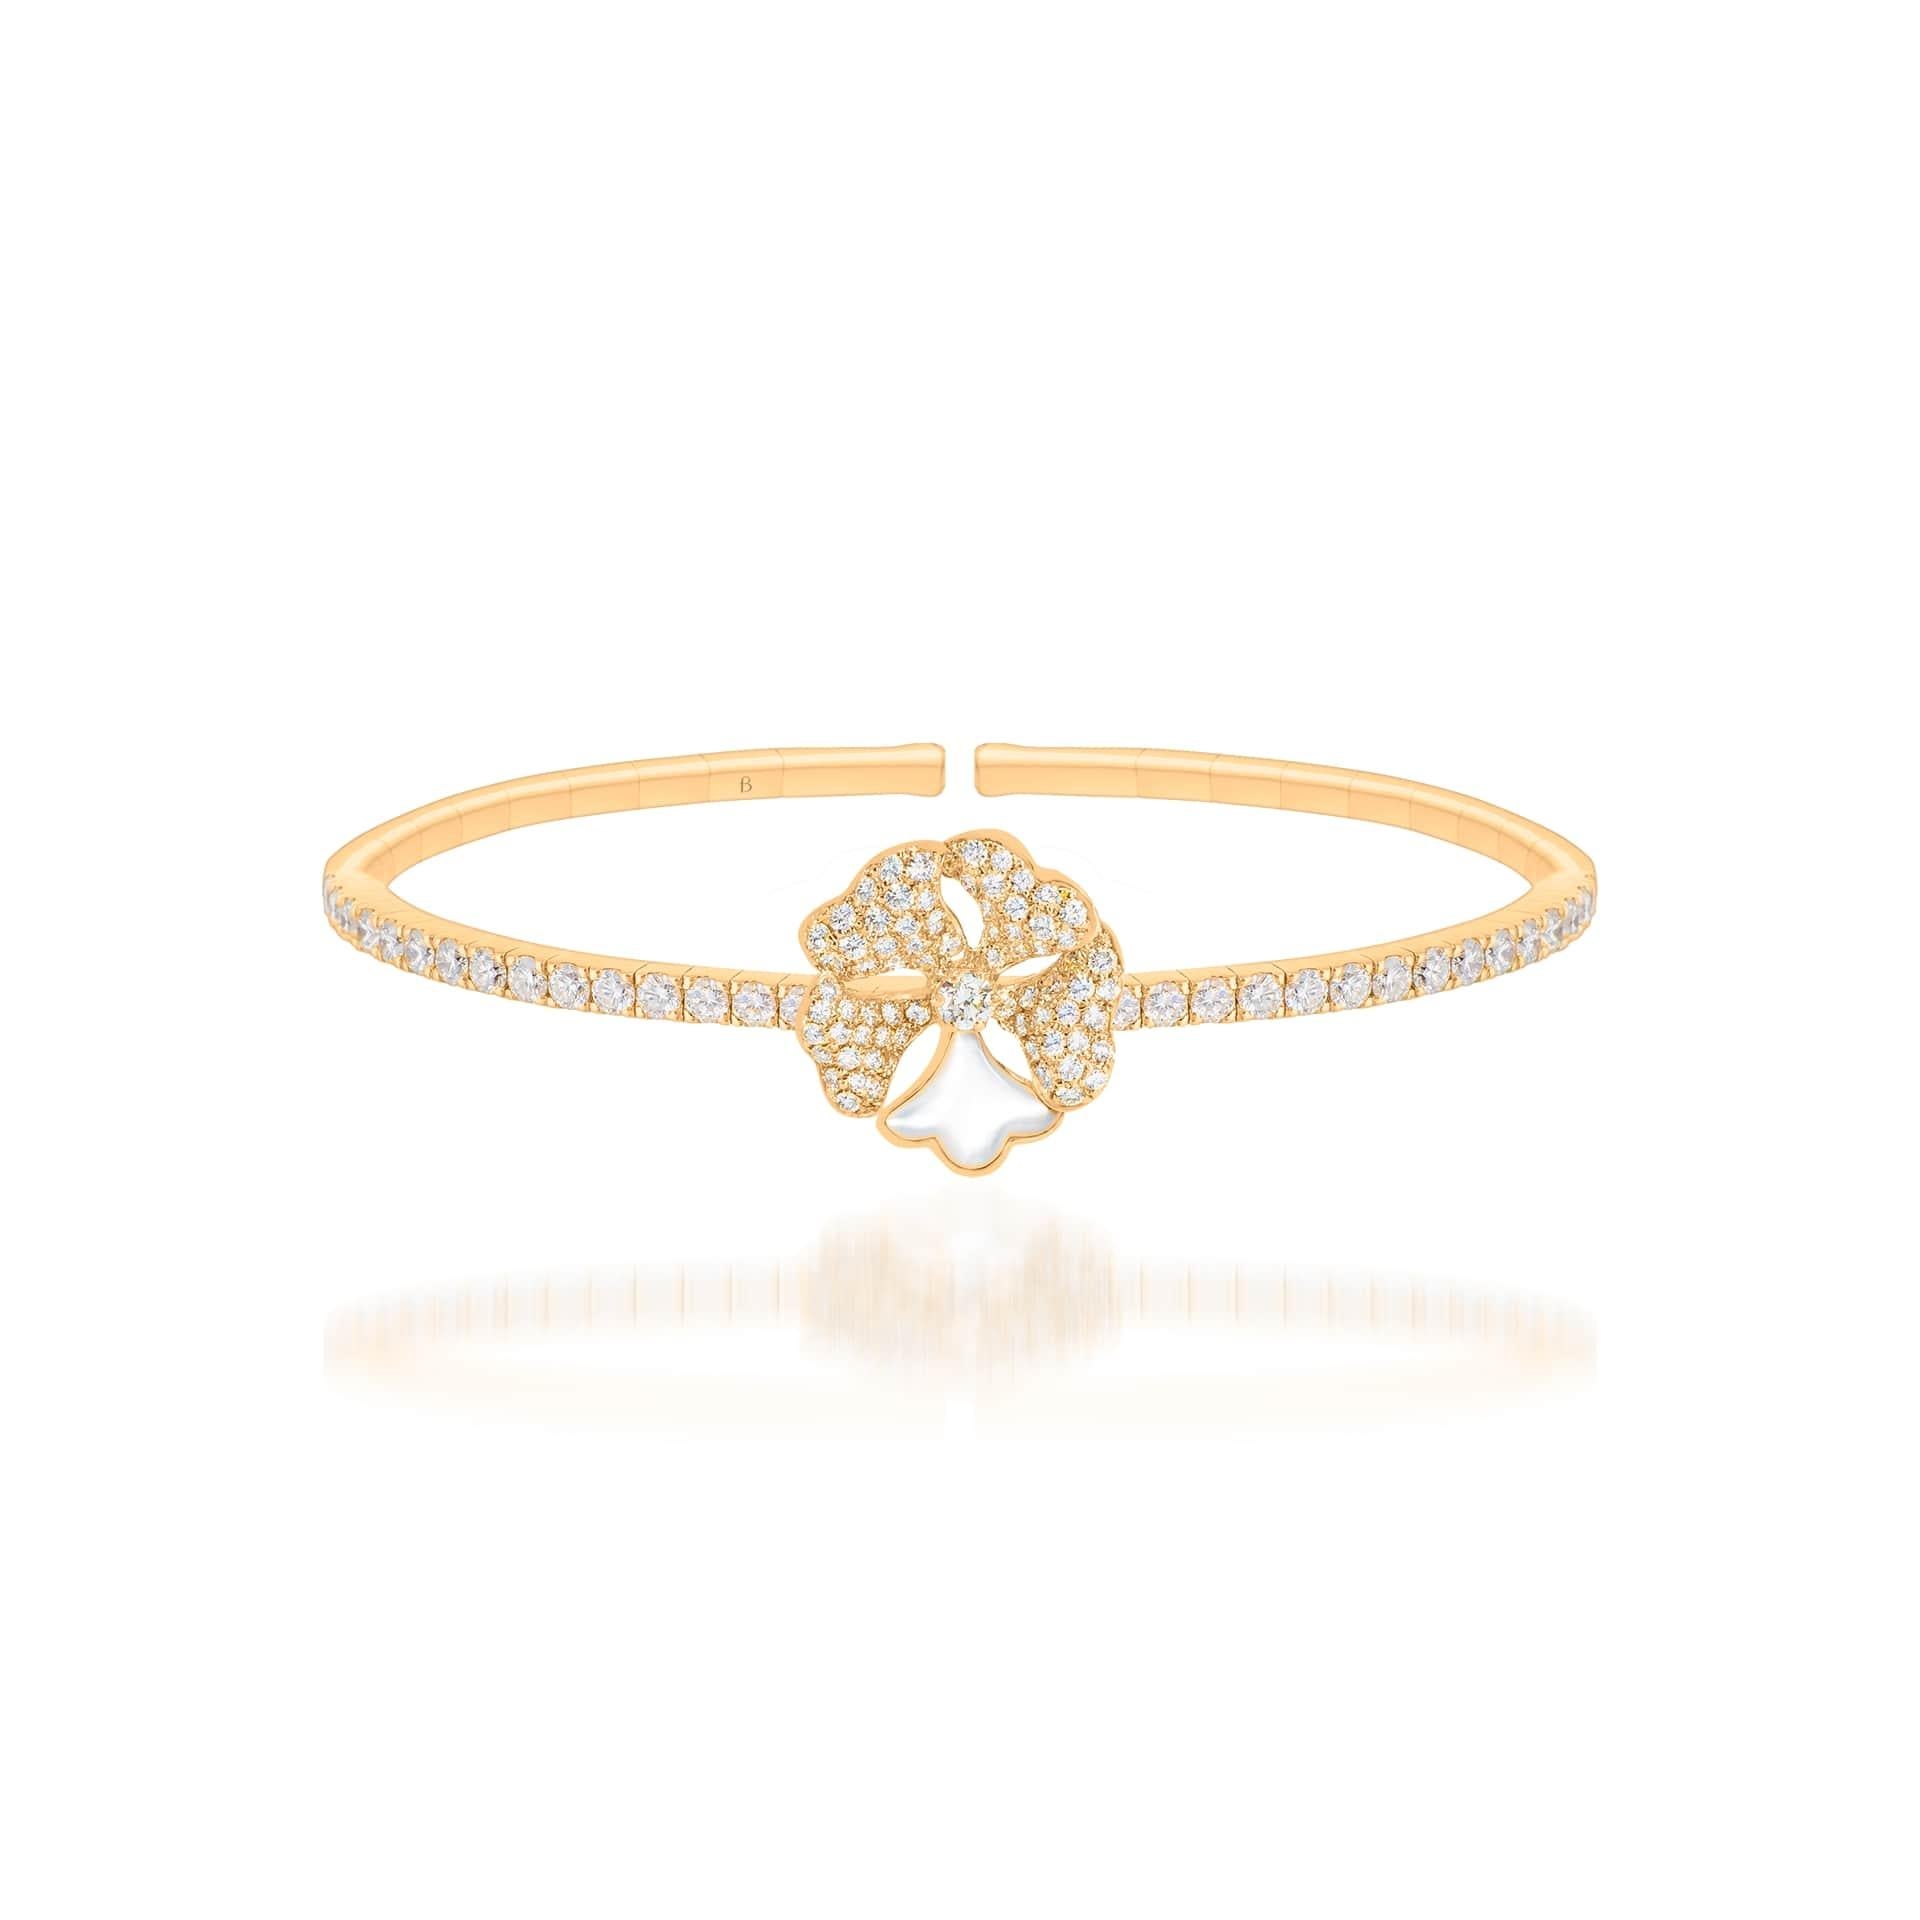 Bloom Diamond and White Mother-of-Pearl Solo Flower Bangle in 18K Yellow Gold

Inspired by the exquisite petals of the alpine cinquefoil flower, the Bloom collection combines the richness of diamonds and precious metals with the light versatility of